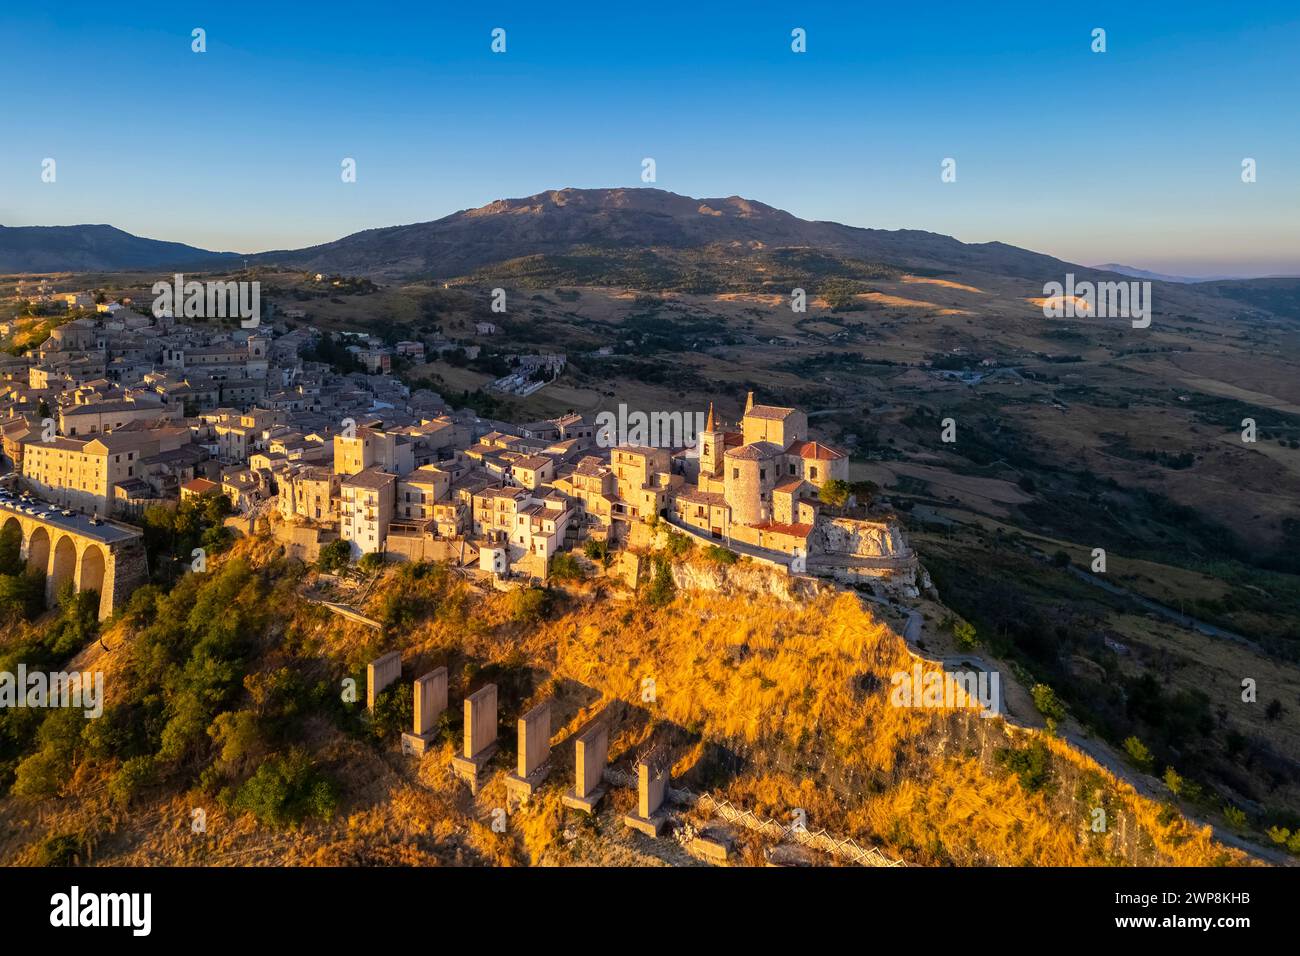 Aerial view of the ancient town of Petralia Soprana, built on a cliff, at sunset. Palermo district, Sicily, Italy. Stock Photo